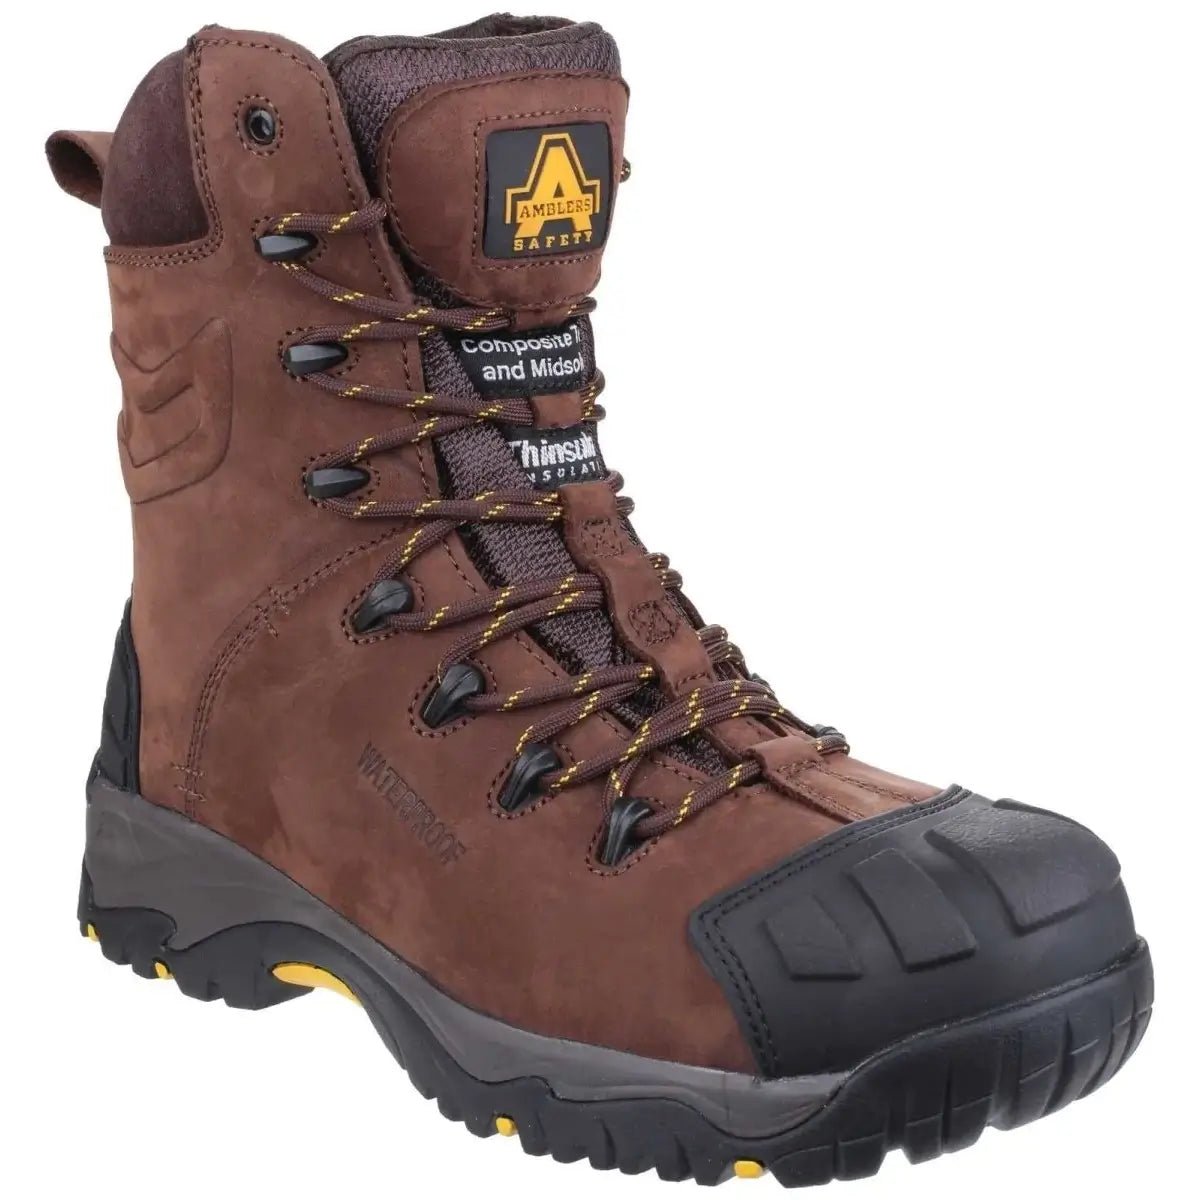 Amblers AS995 Pillar Waterproof Safety Boots - Shoe Store Direct